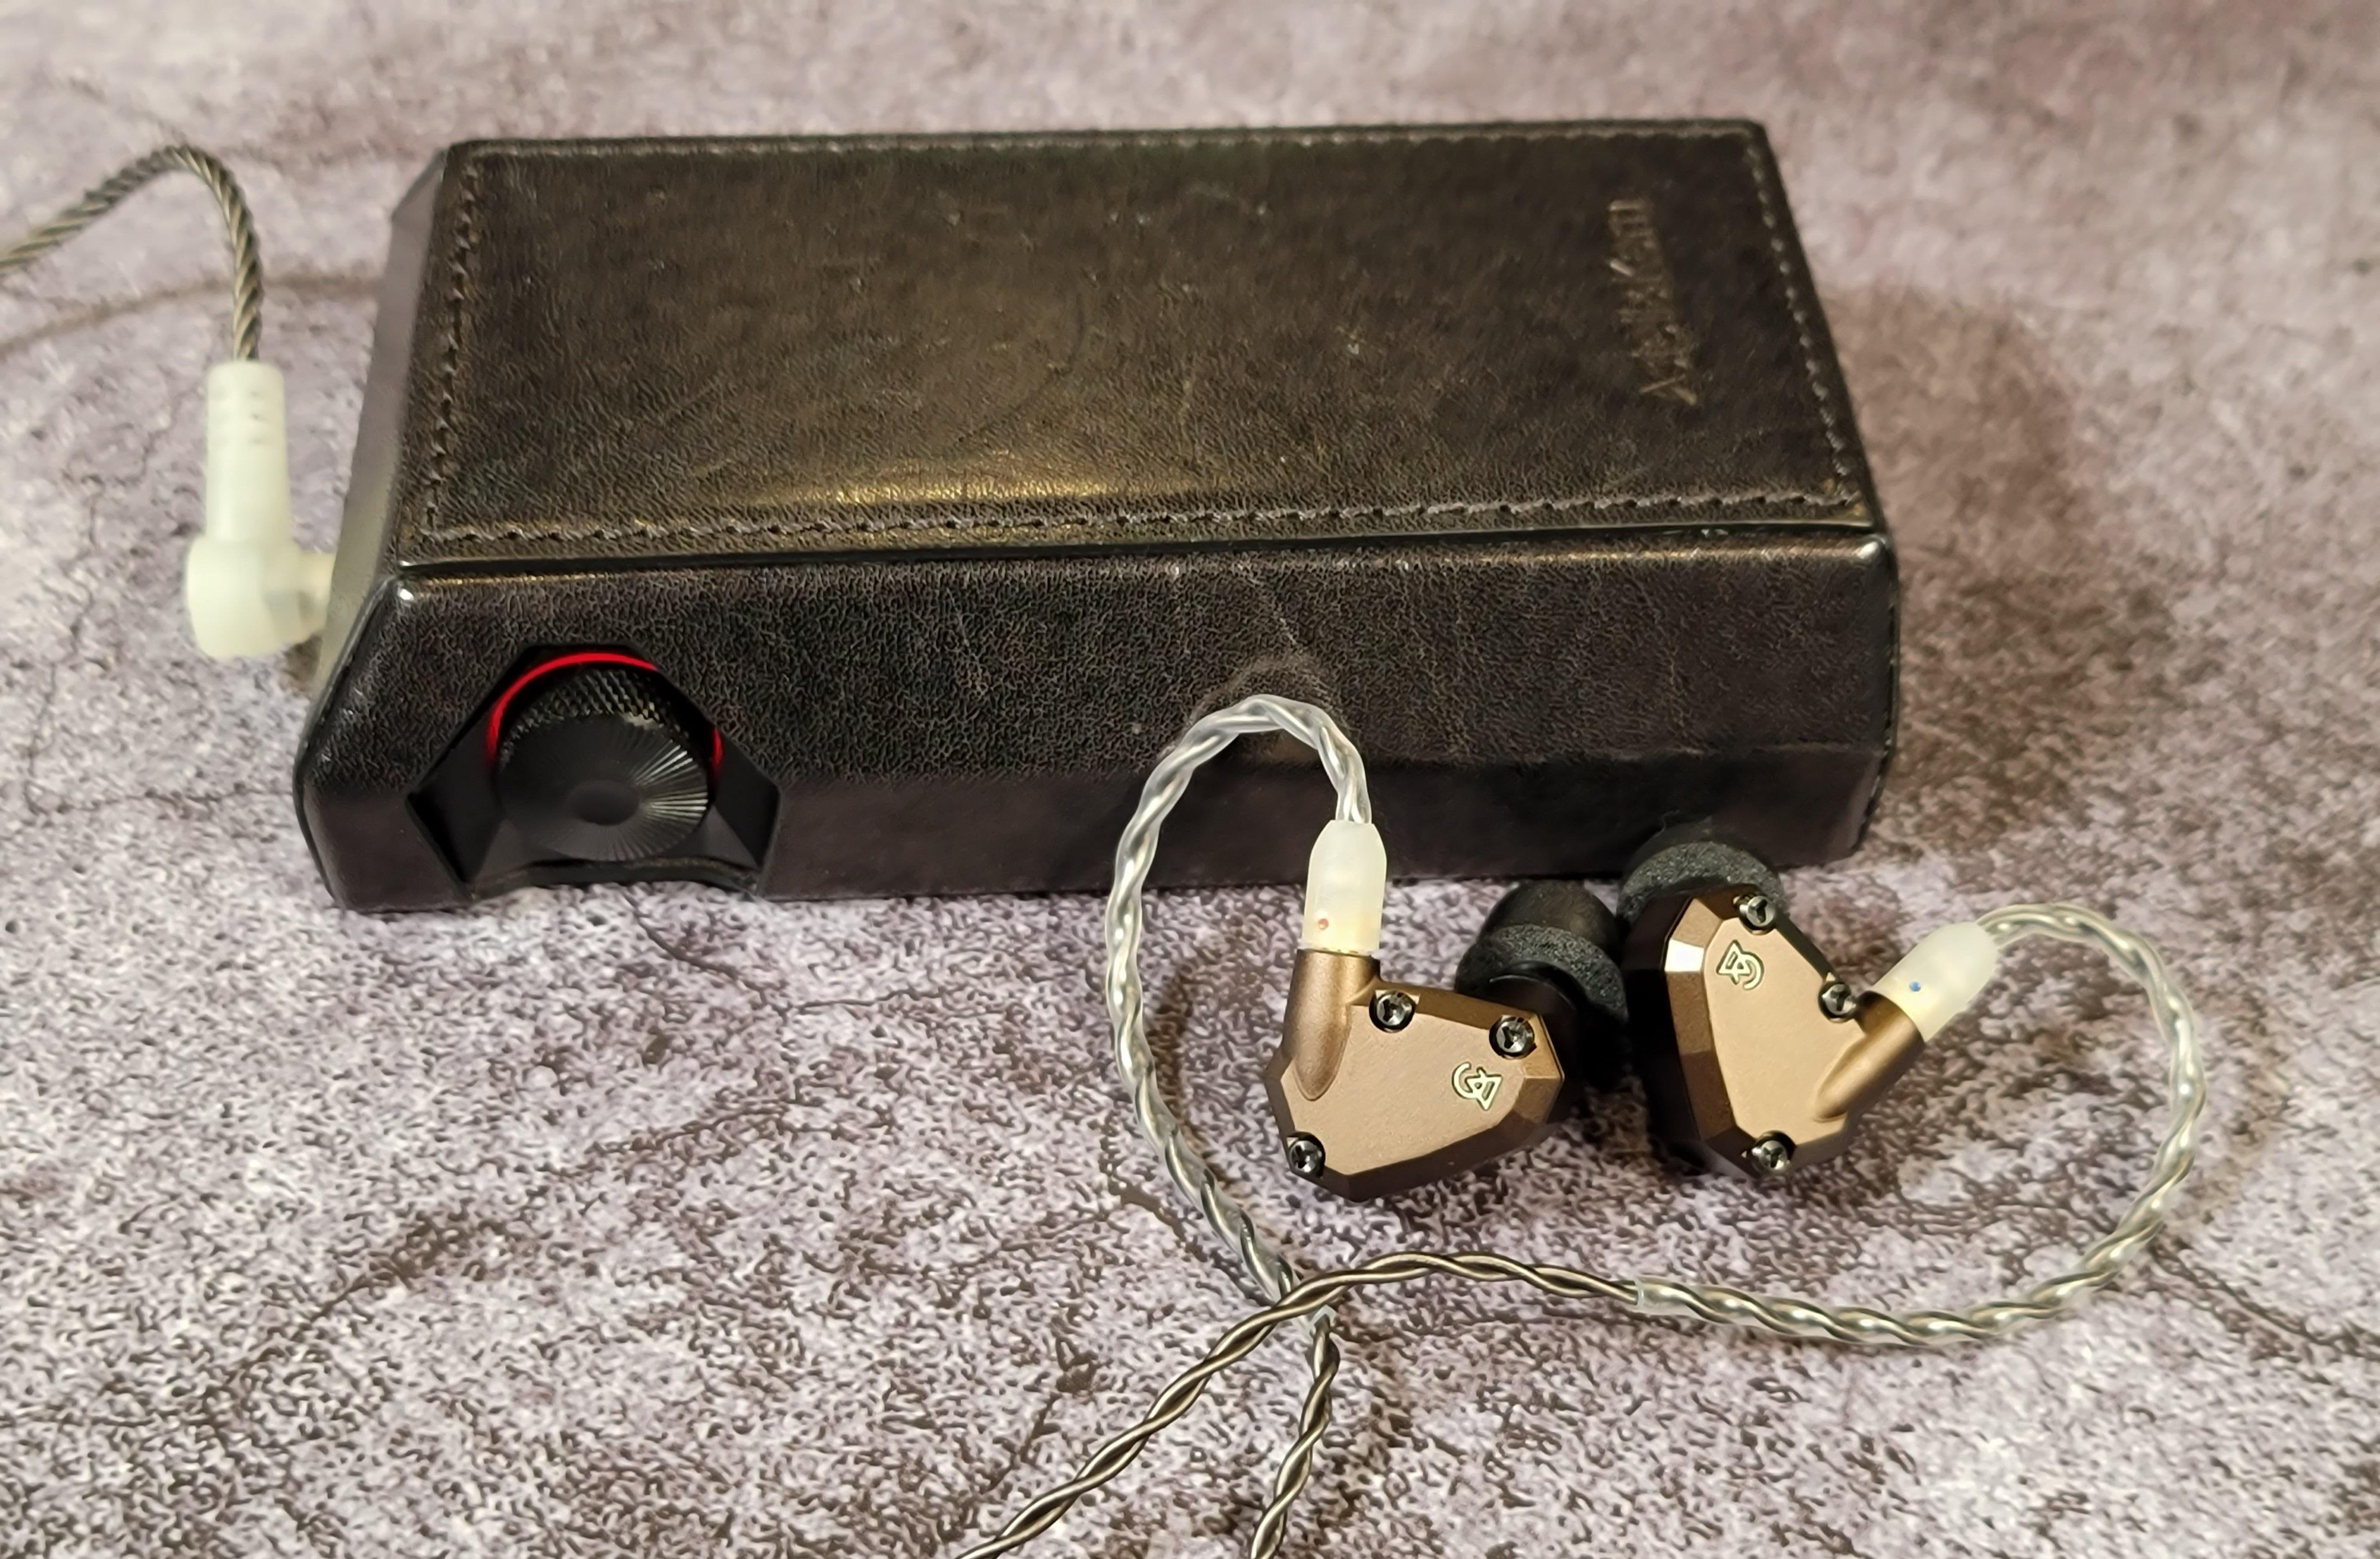 Sub $1000 Technical Contender? | Campfire Audio Holocene Review